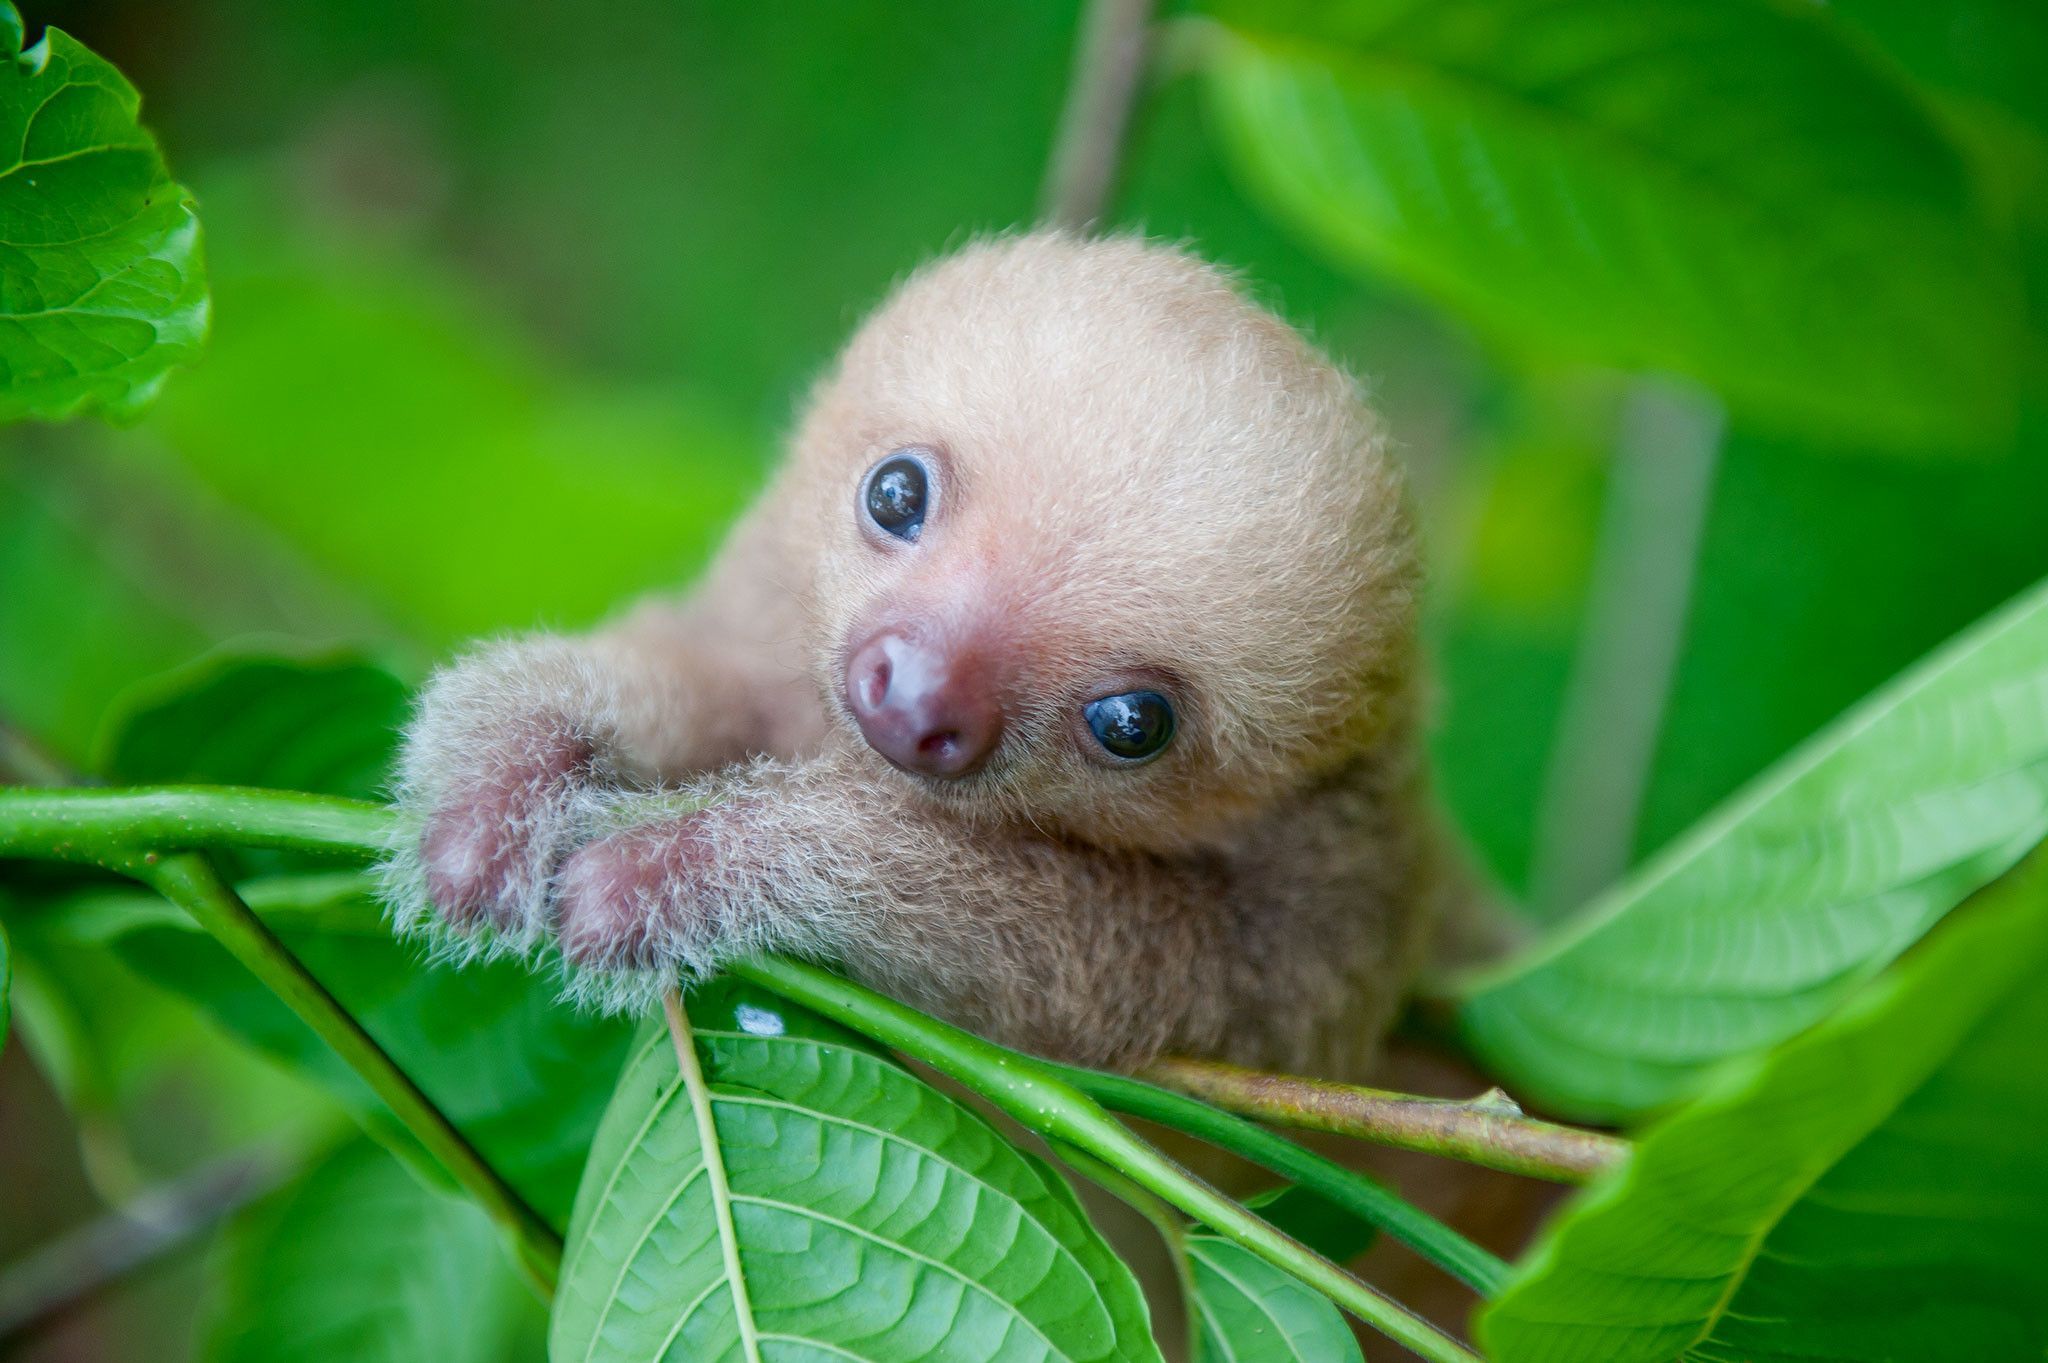 Cute Sloth Wallpaper. Baby animals picture, Cute